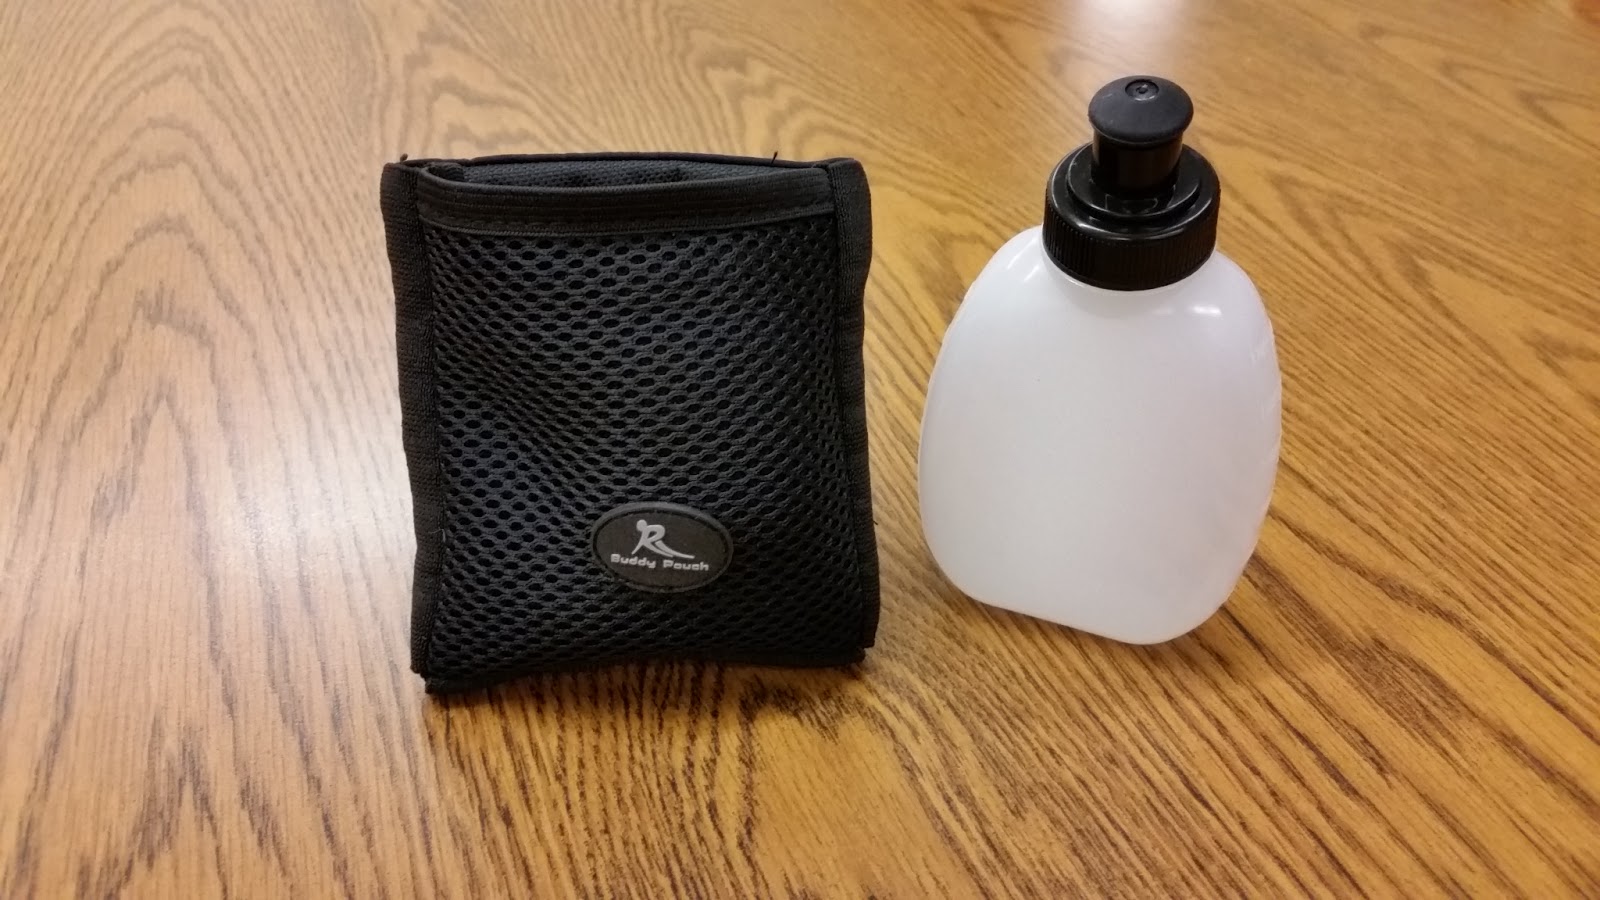 Running Without Injuries: Buddy Pouch H2O and Buddy Brite Review